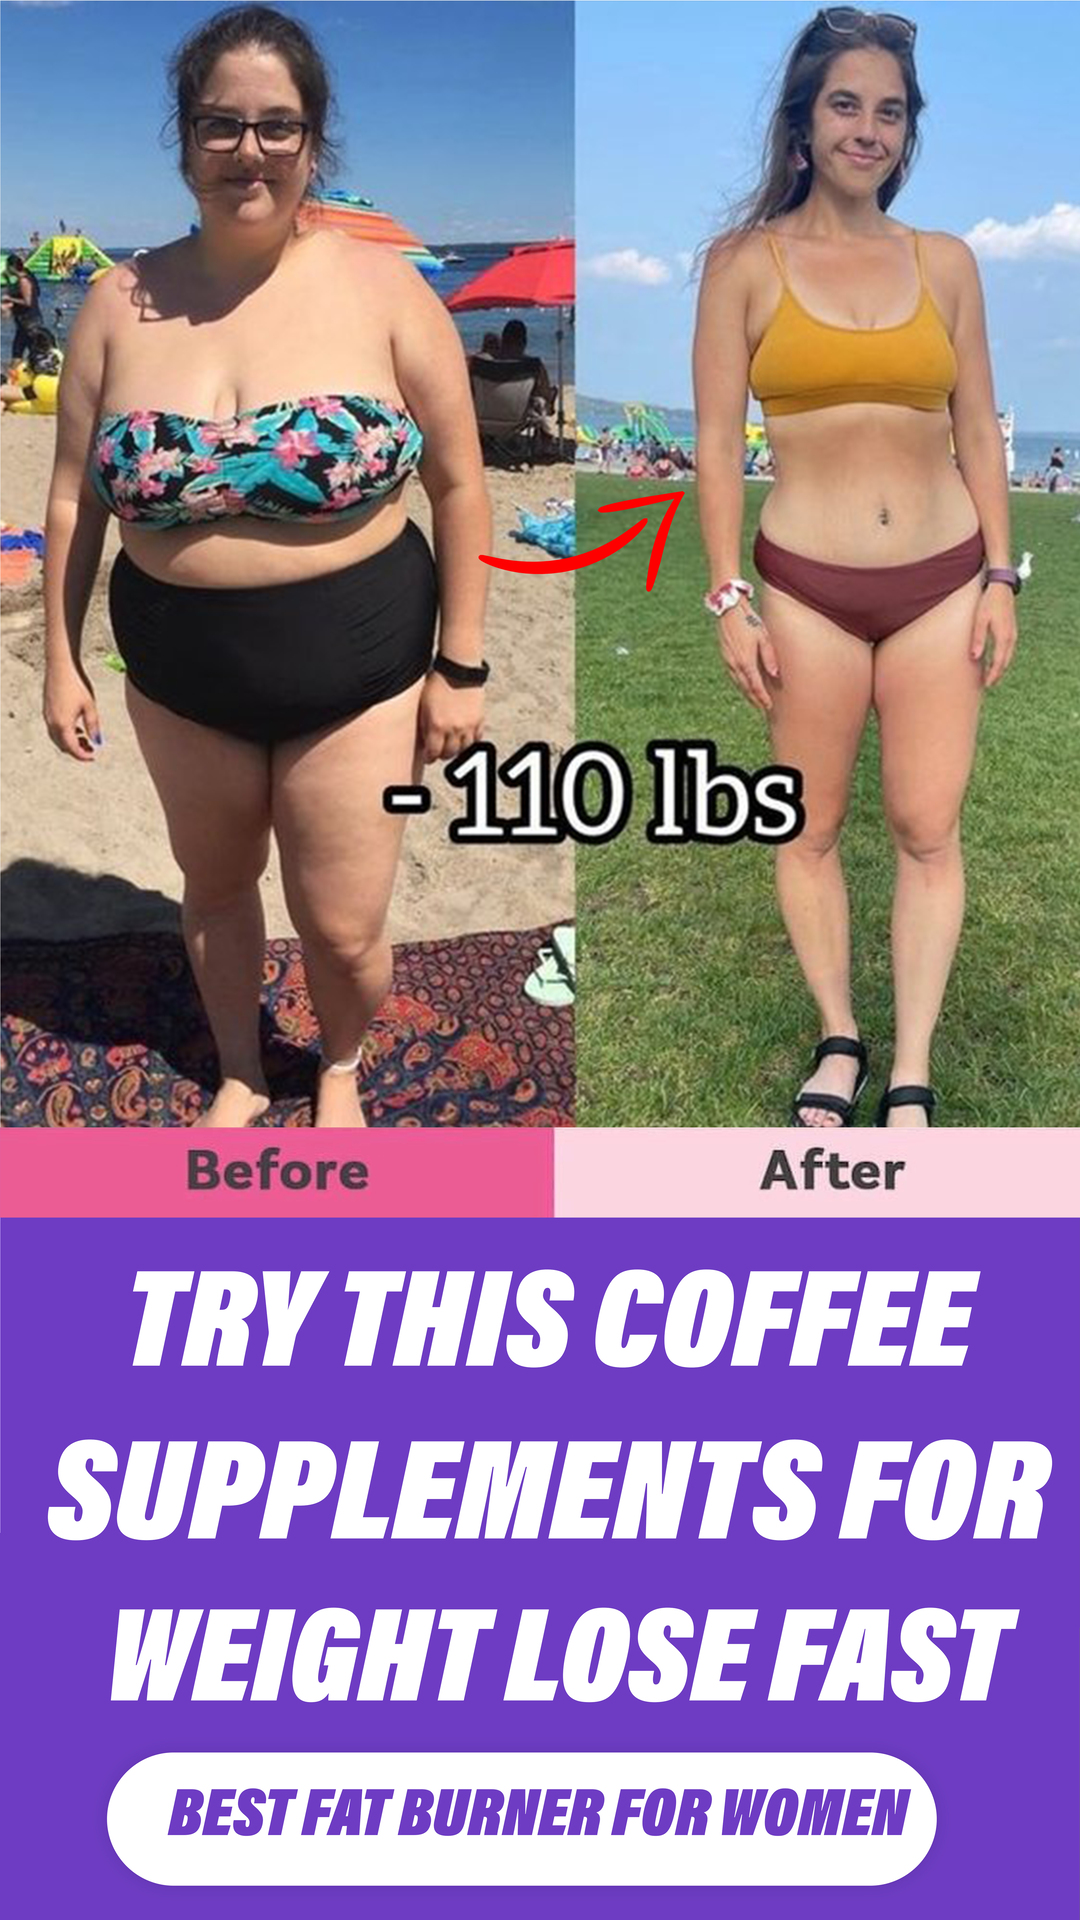 Coffee Supplements for Fat Loss - Best Fat Burner to Weight Lose Fast